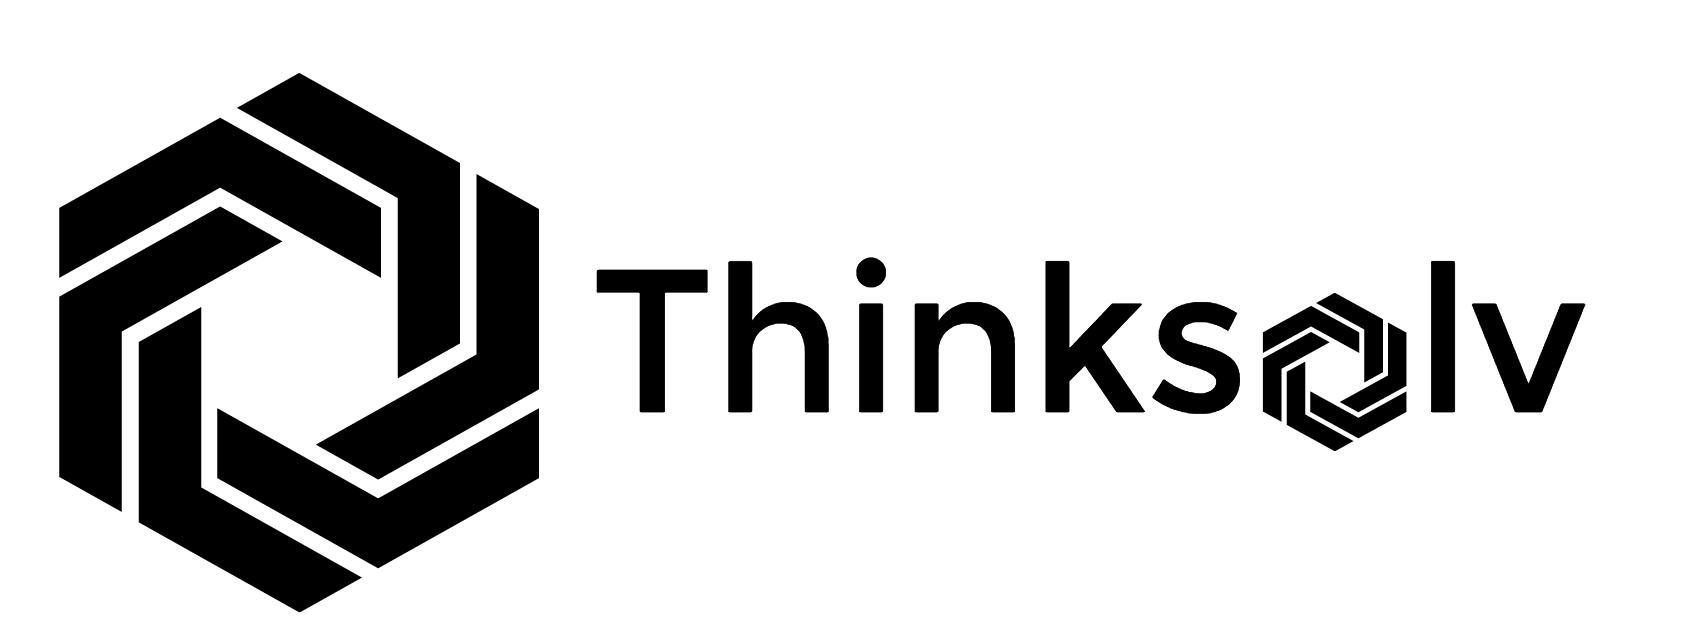 stencil.facebook-cover thinksolv.png